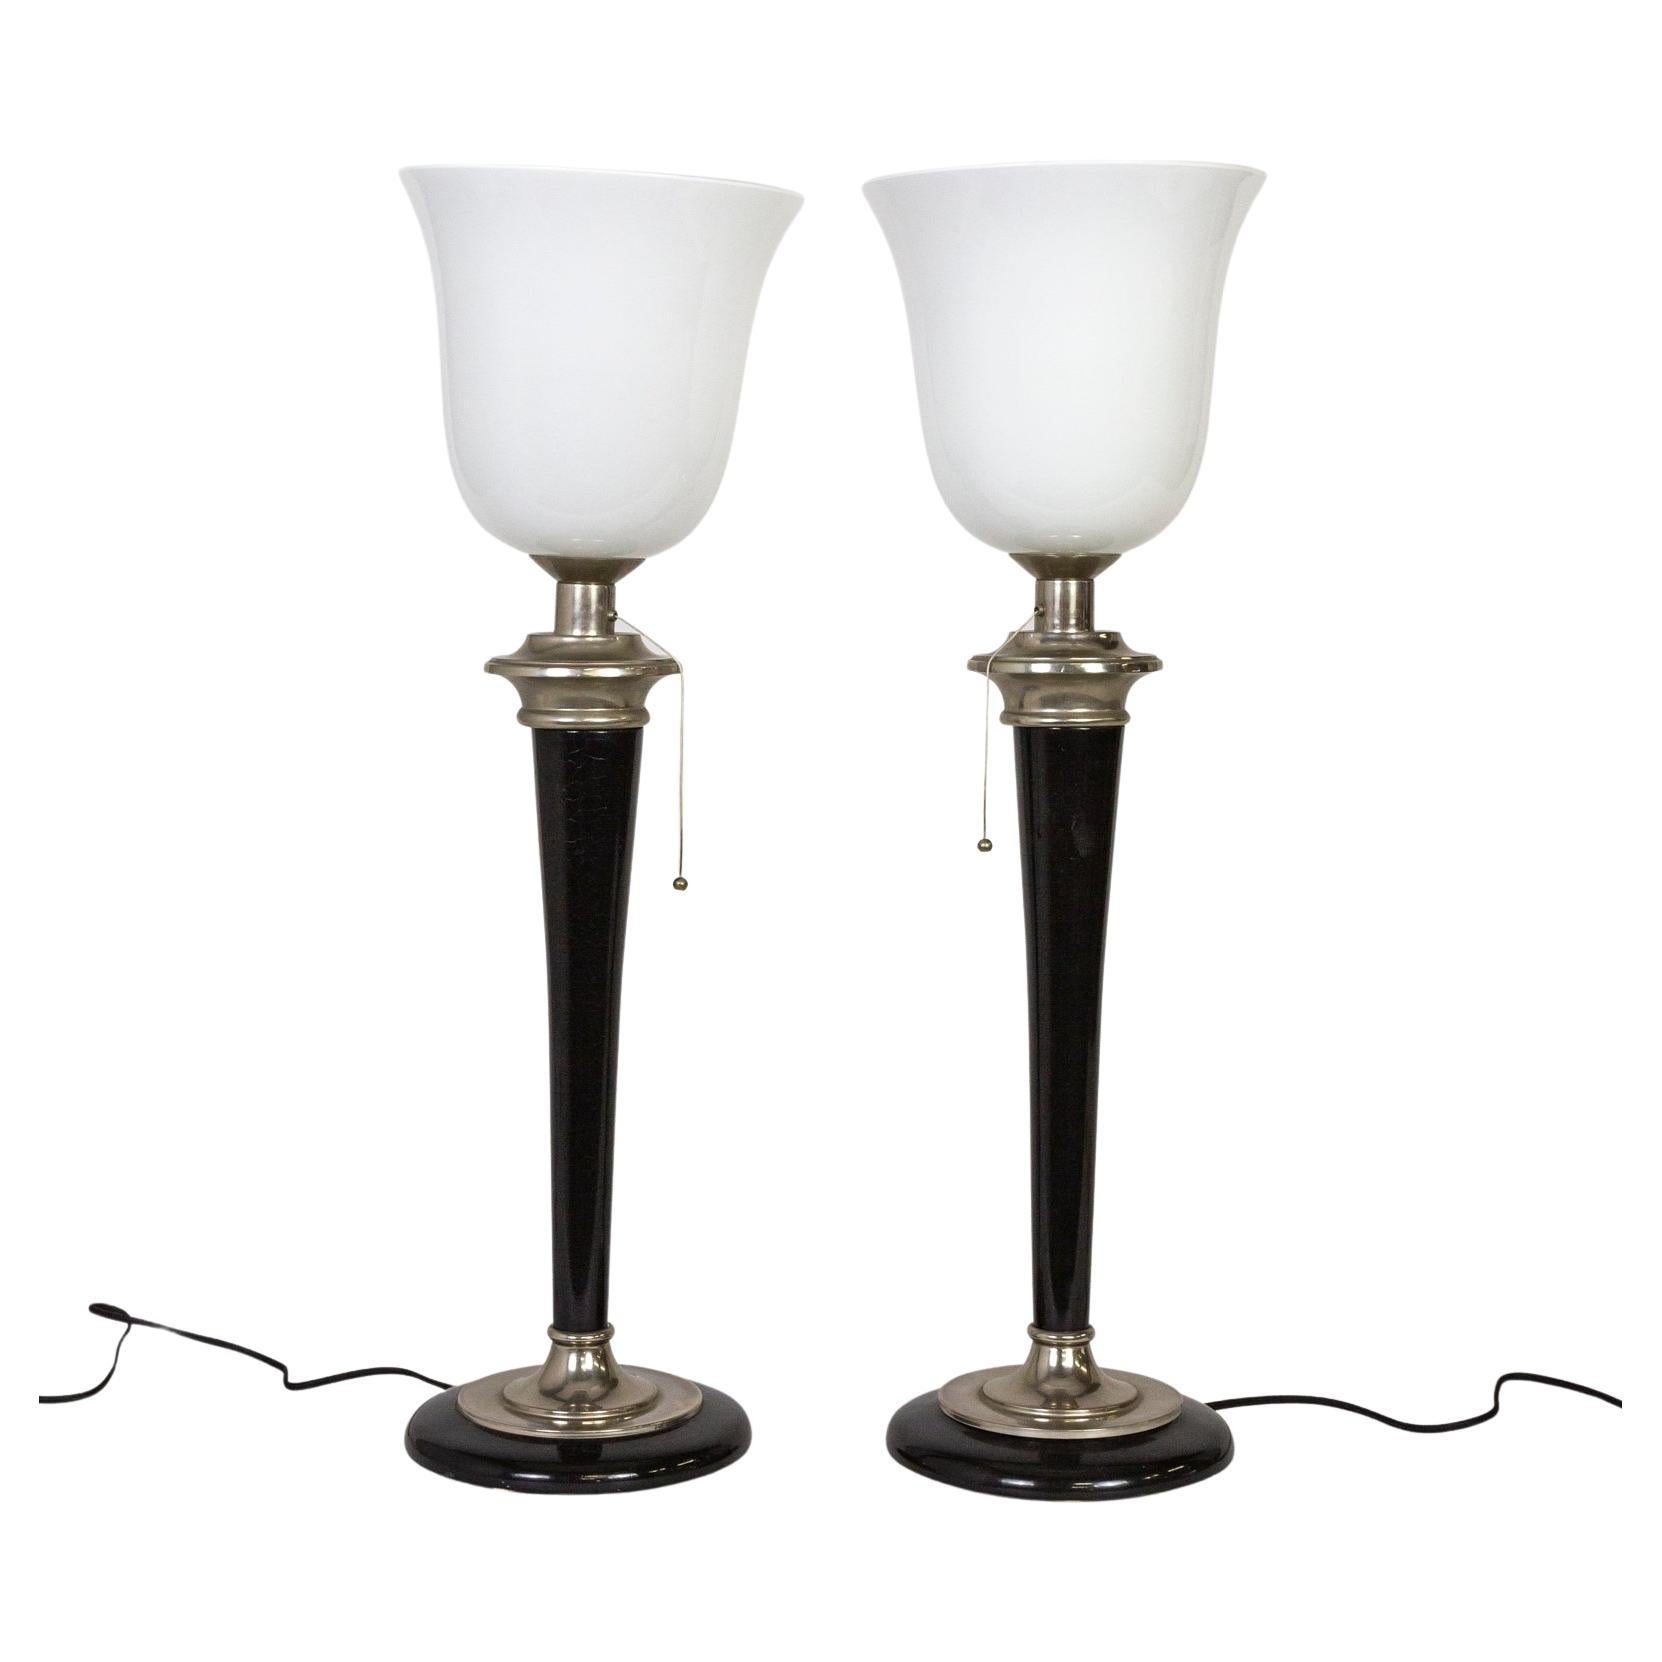 Large Mazda Black & Silver Deco Lamps w/ Opaline Glass Shades, Pair